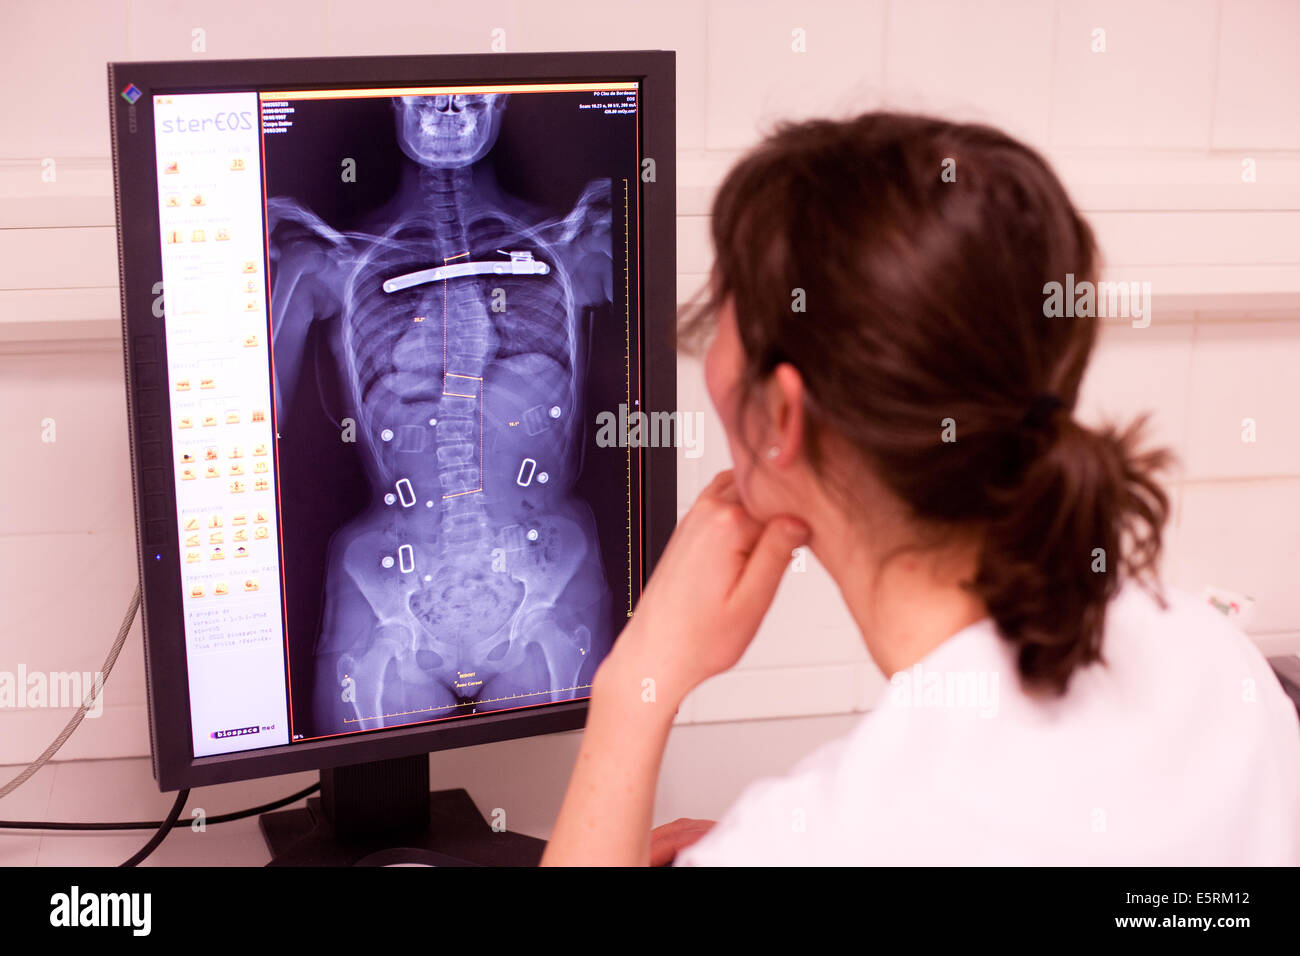 EOS biplanar X-ray scanner, this 2D and 3D digital X-ray imaging equipment  is dedicated to the orthopedic practice and permits Stock Photo - Alamy